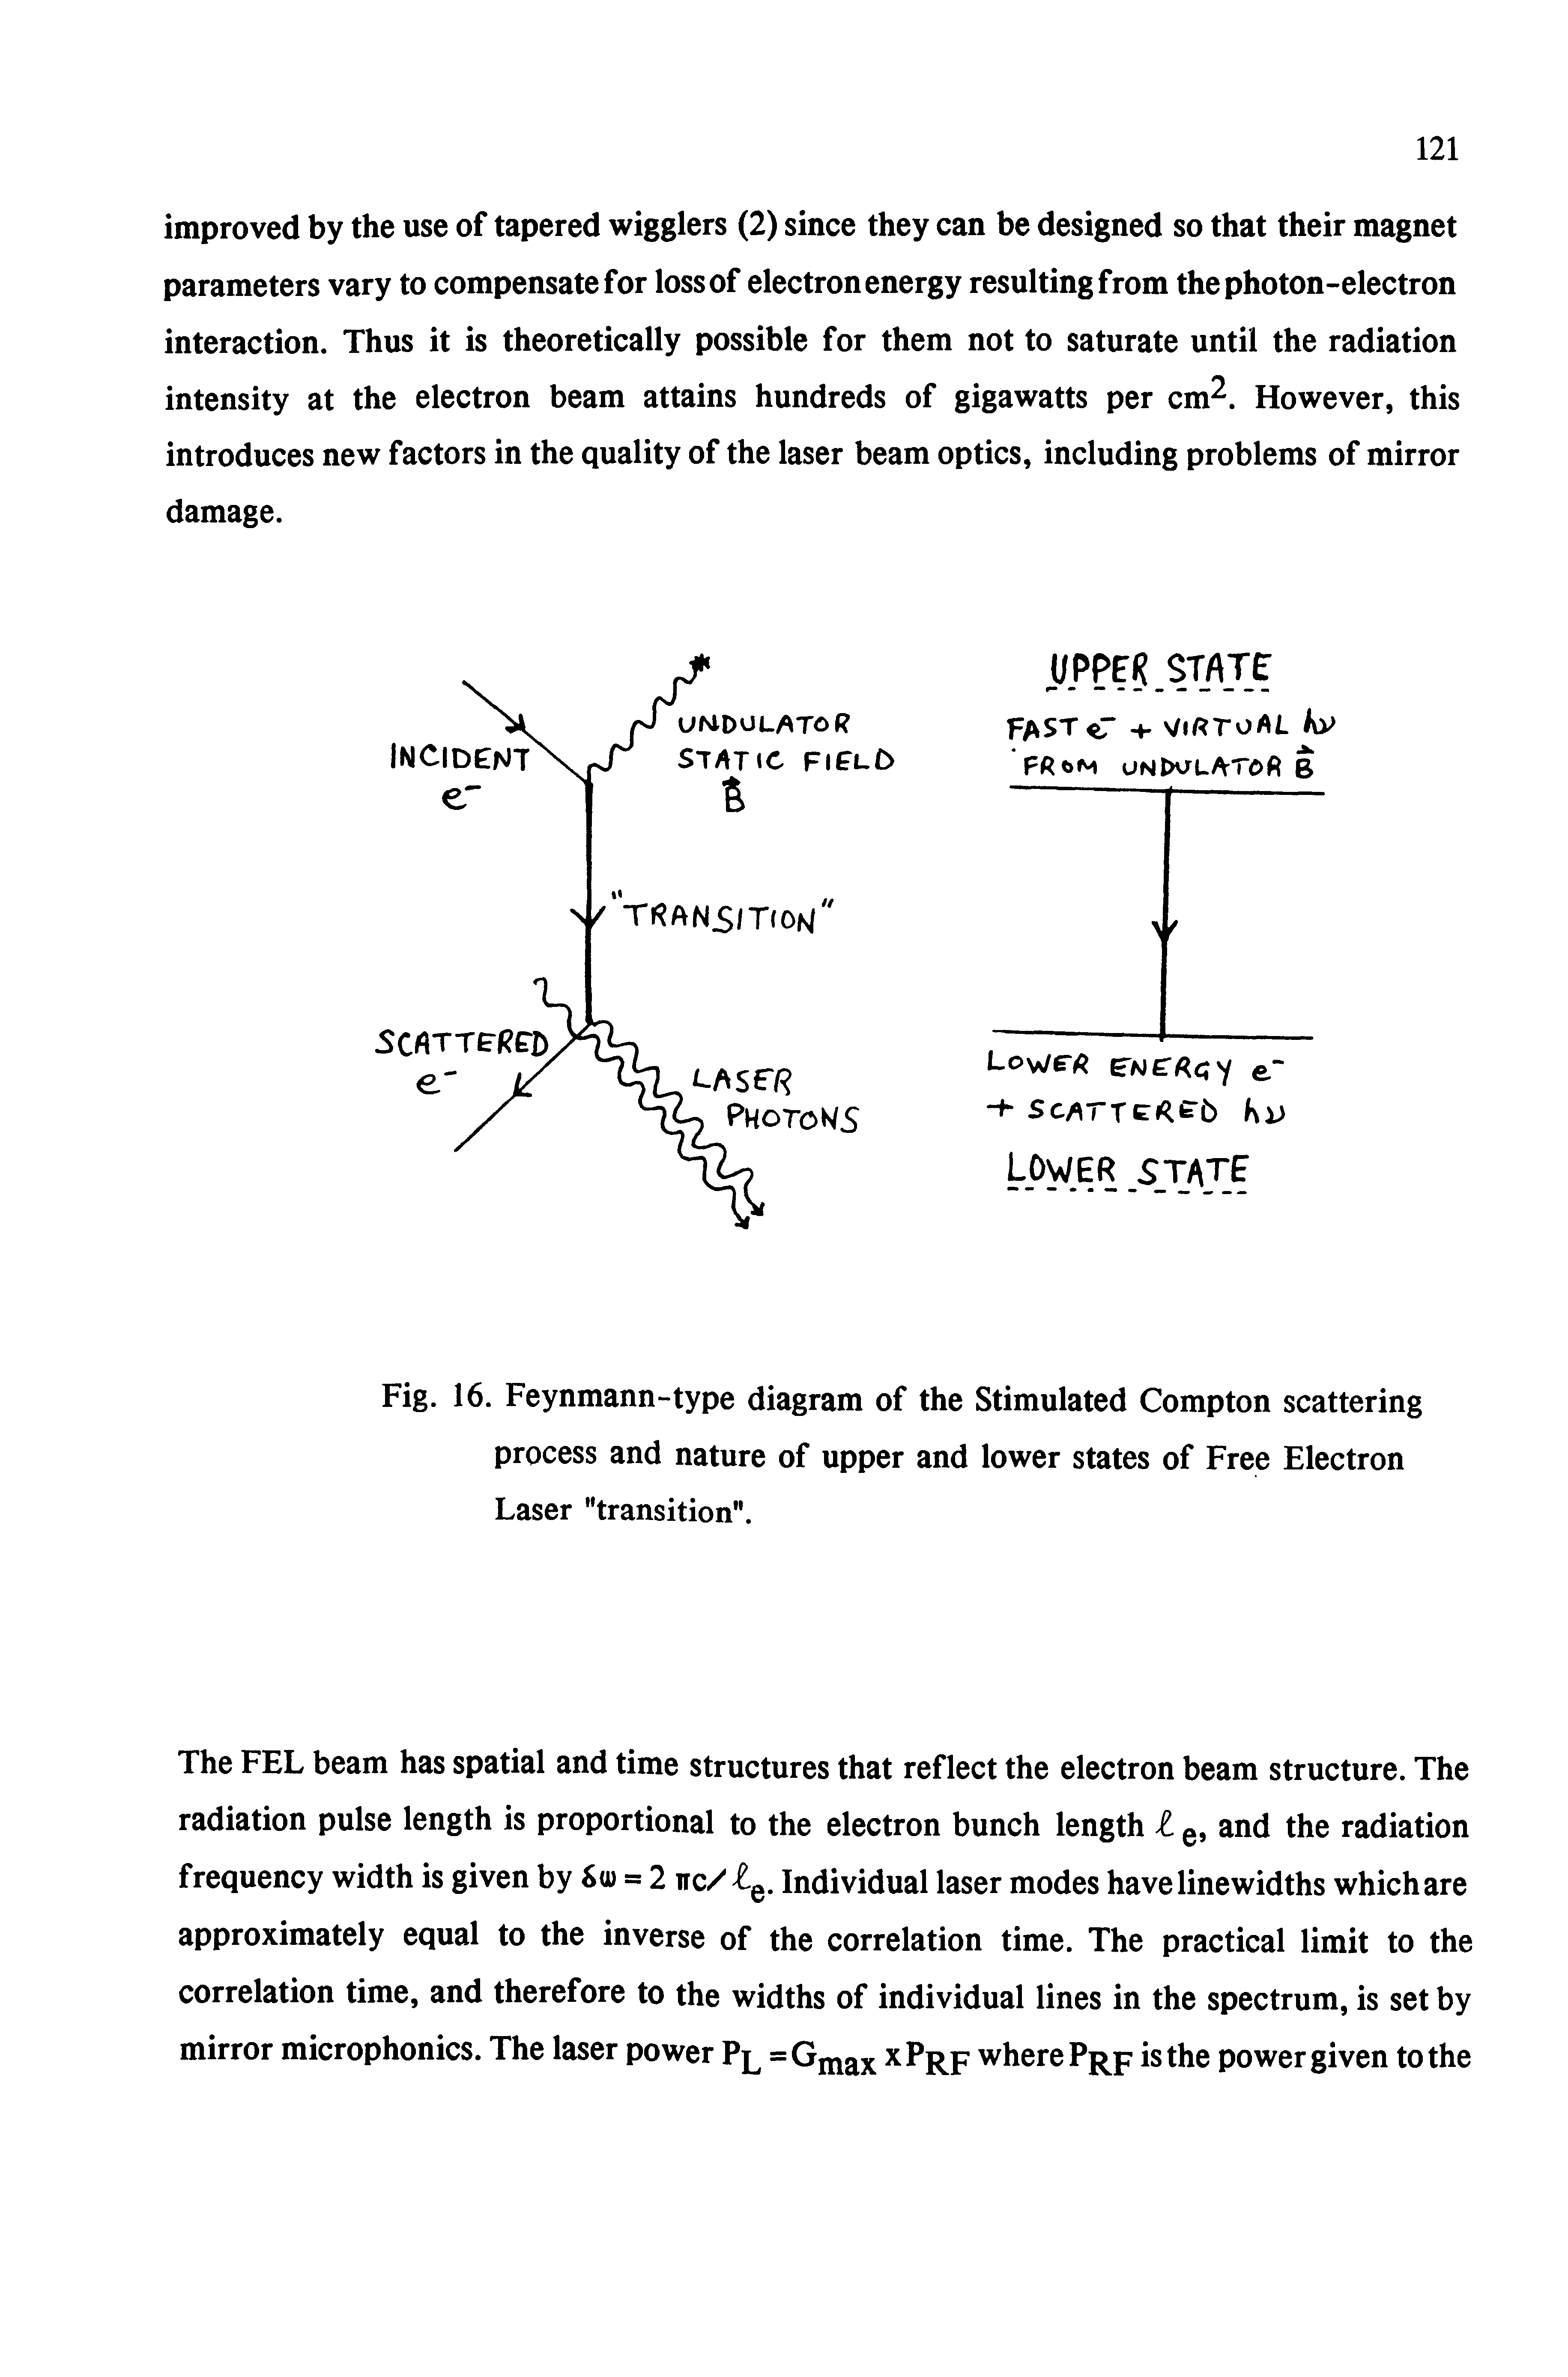 Fig. 16. Feynmann-type diagram of the Stimulated Compton scattering process and nature of upper and lower states of Free Electron Laser transition".